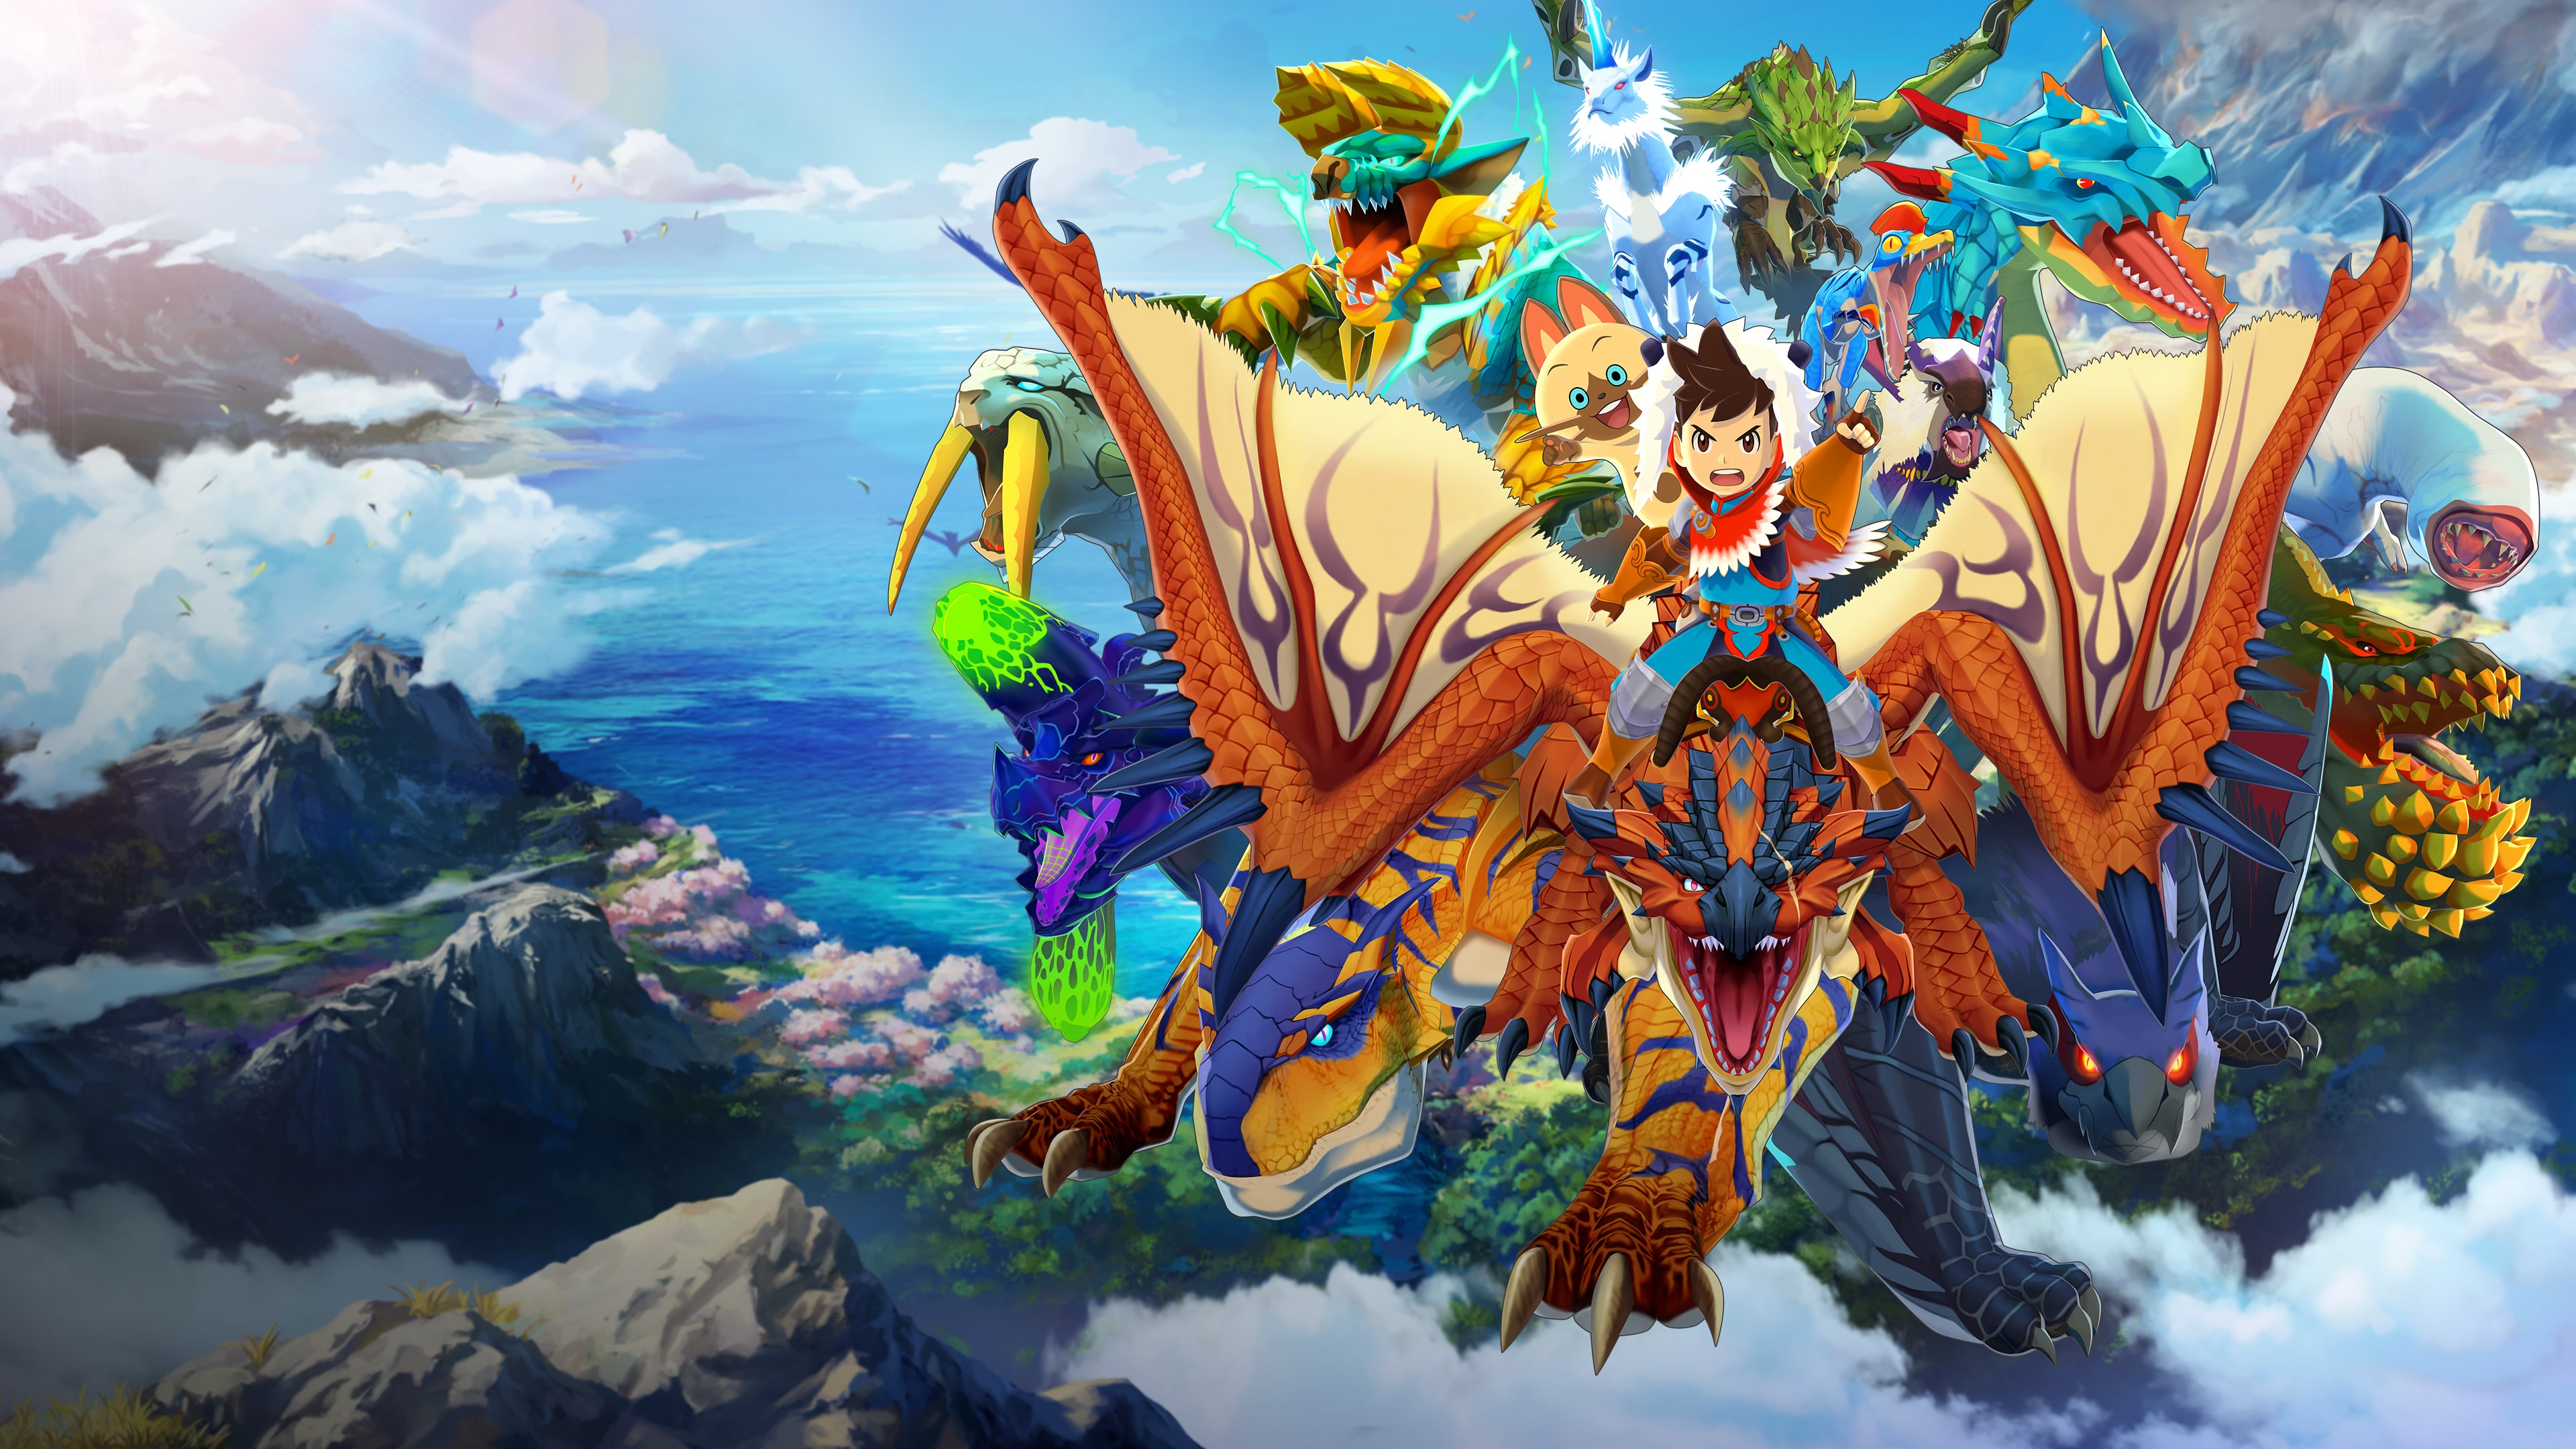 Monster Hunter Stories (Simplified Chinese, English, Korean, Japanese, Traditional Chinese)